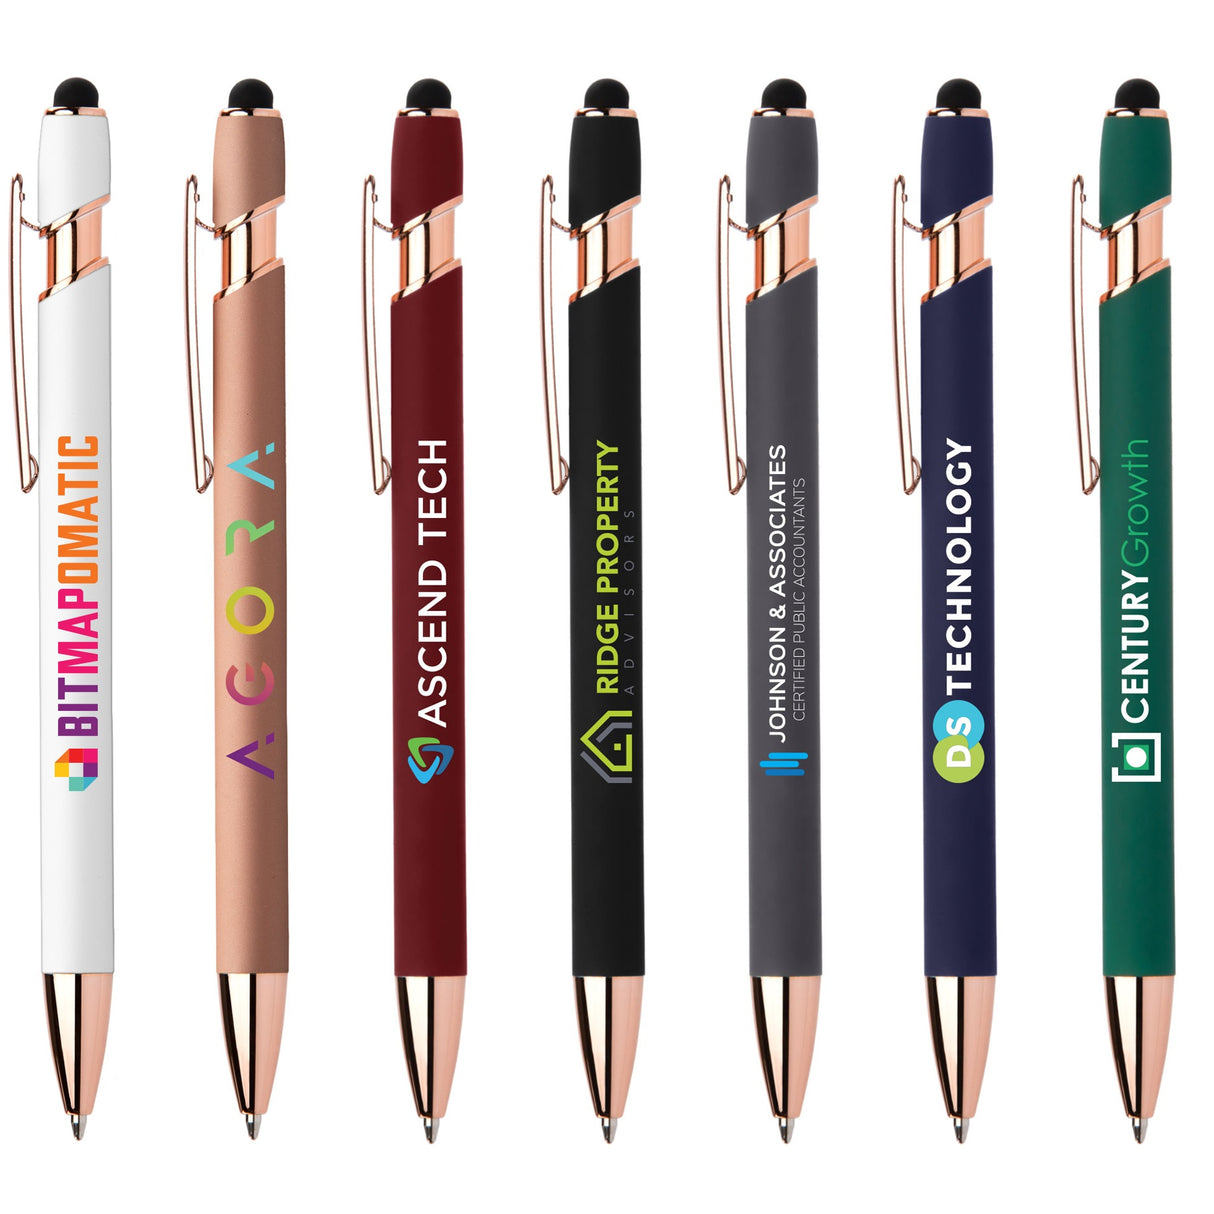 Ellipse Softy Rose Gold Classic w/ Stylus - ColorJet